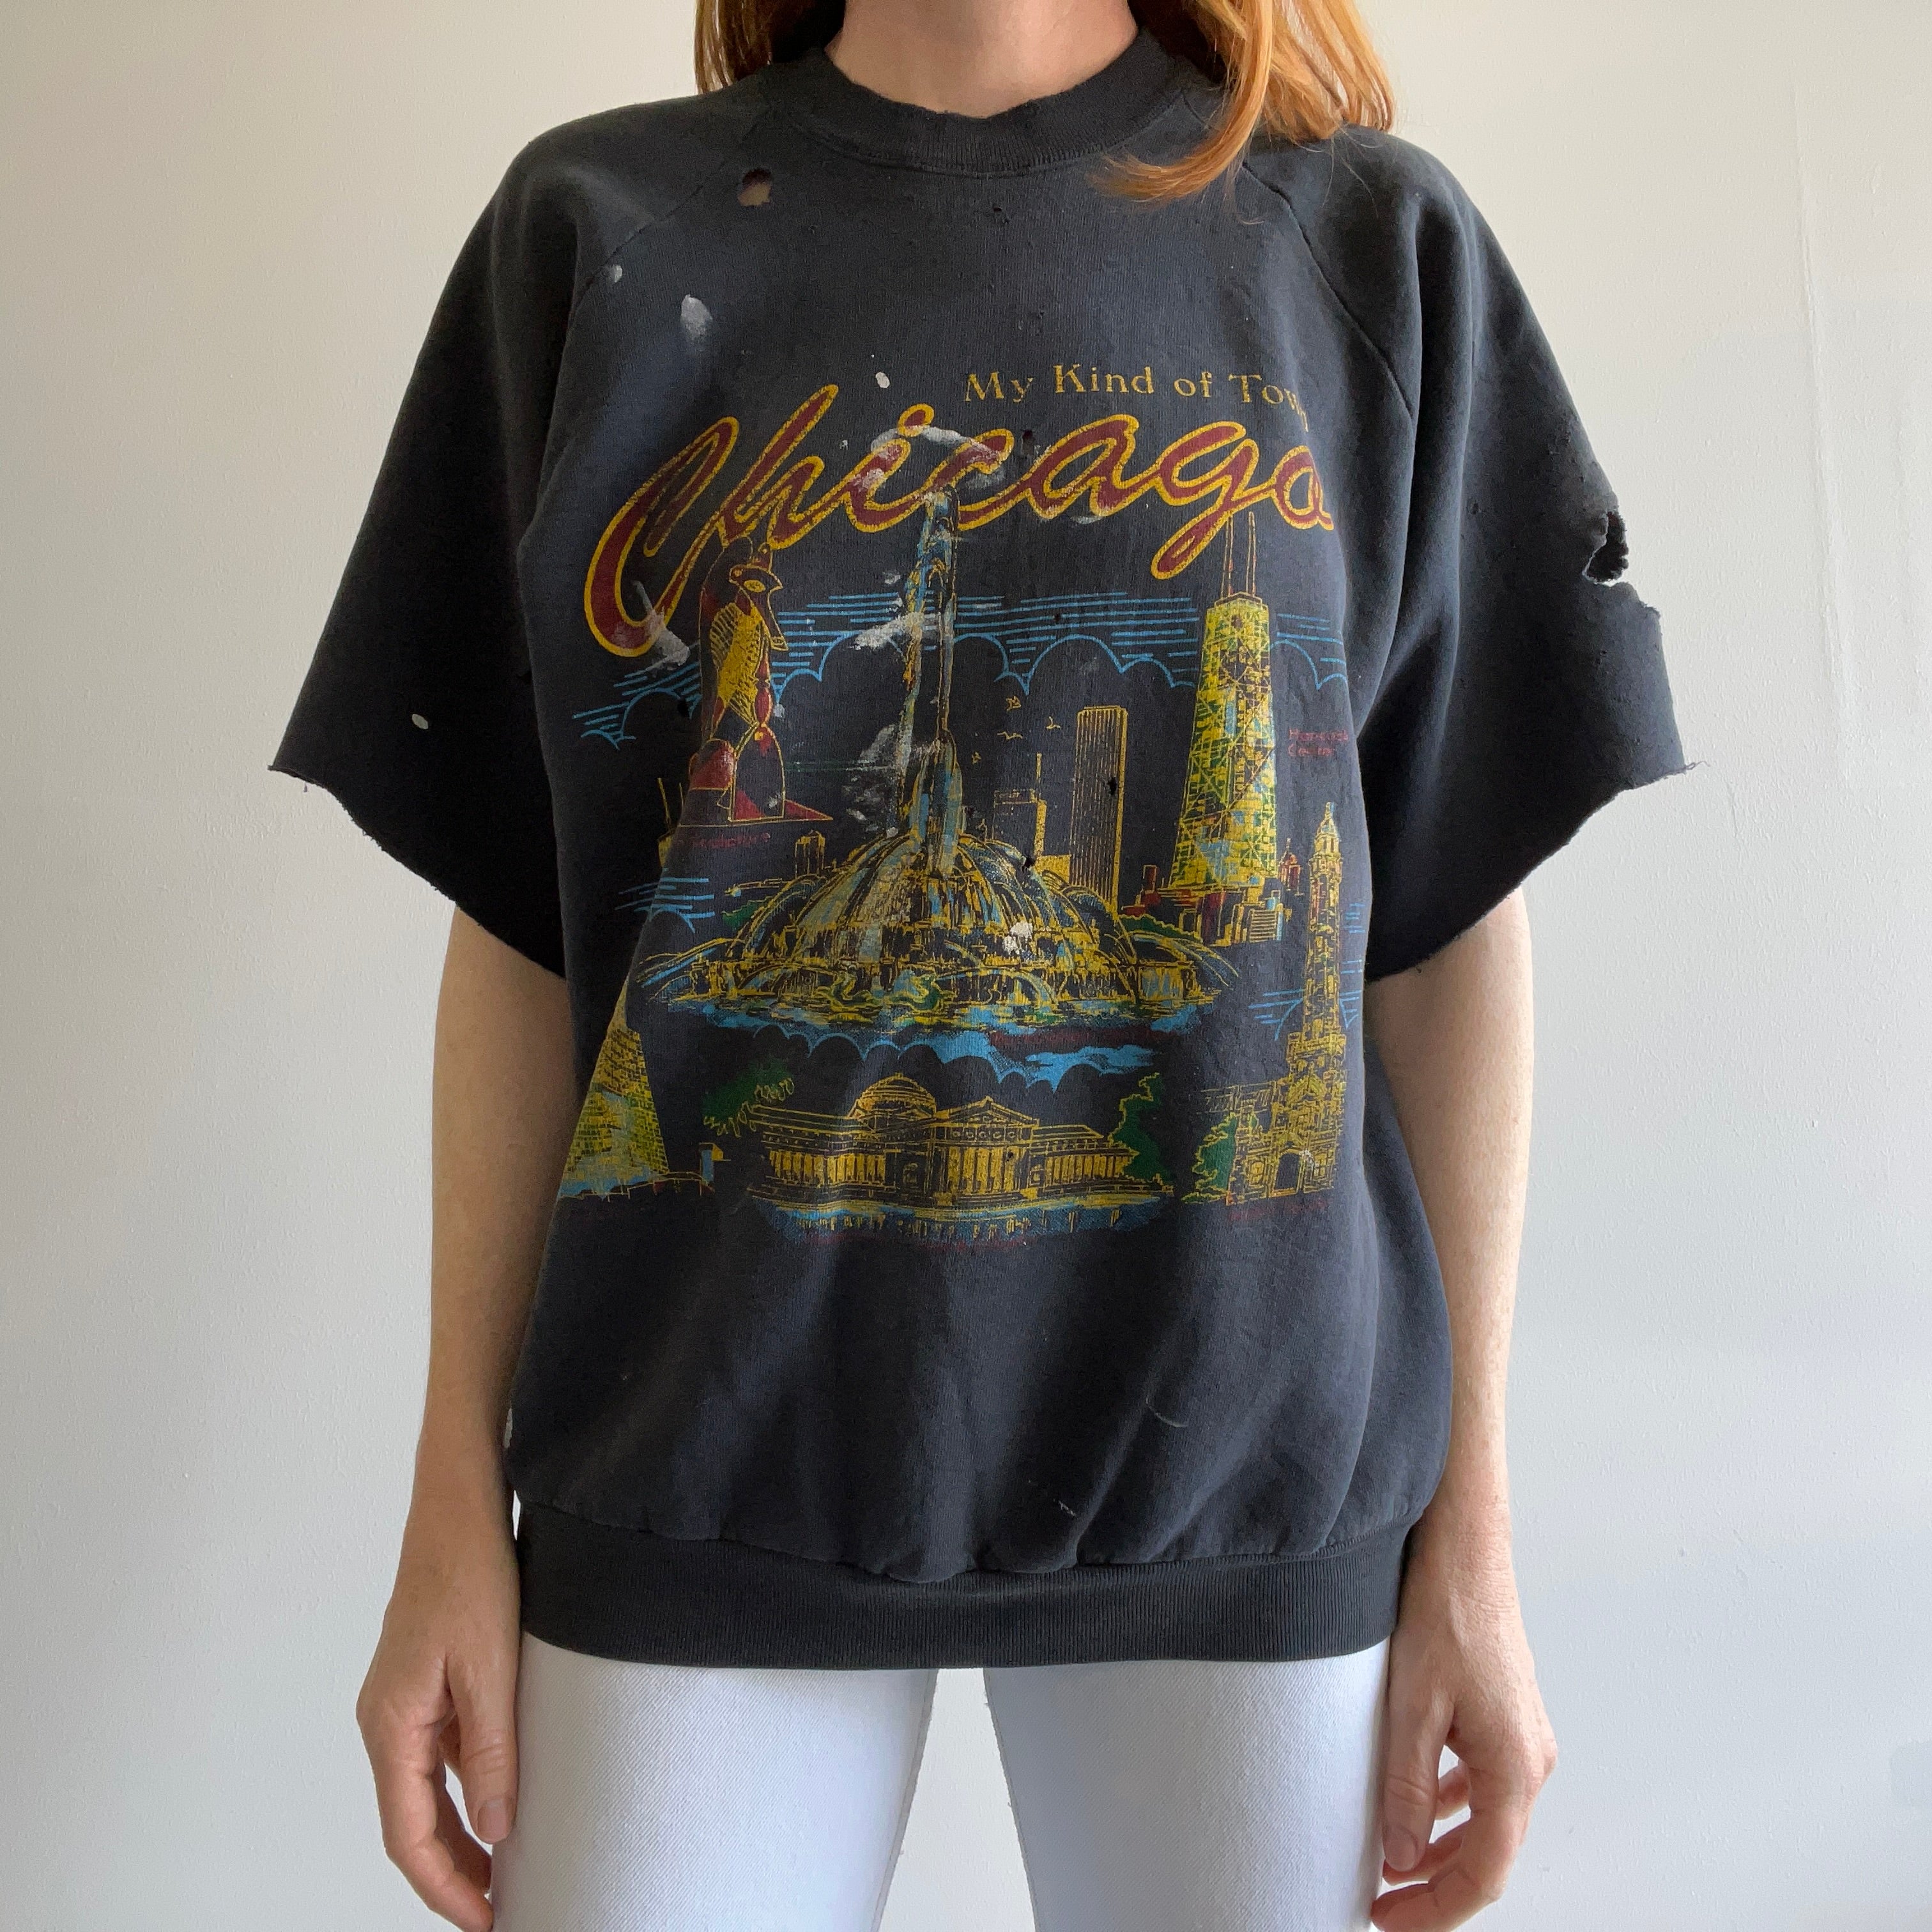 1980s Very Beat Up Chicago Graphic Cut Sleeve Sweatshirt - THIS. IS. RAD.